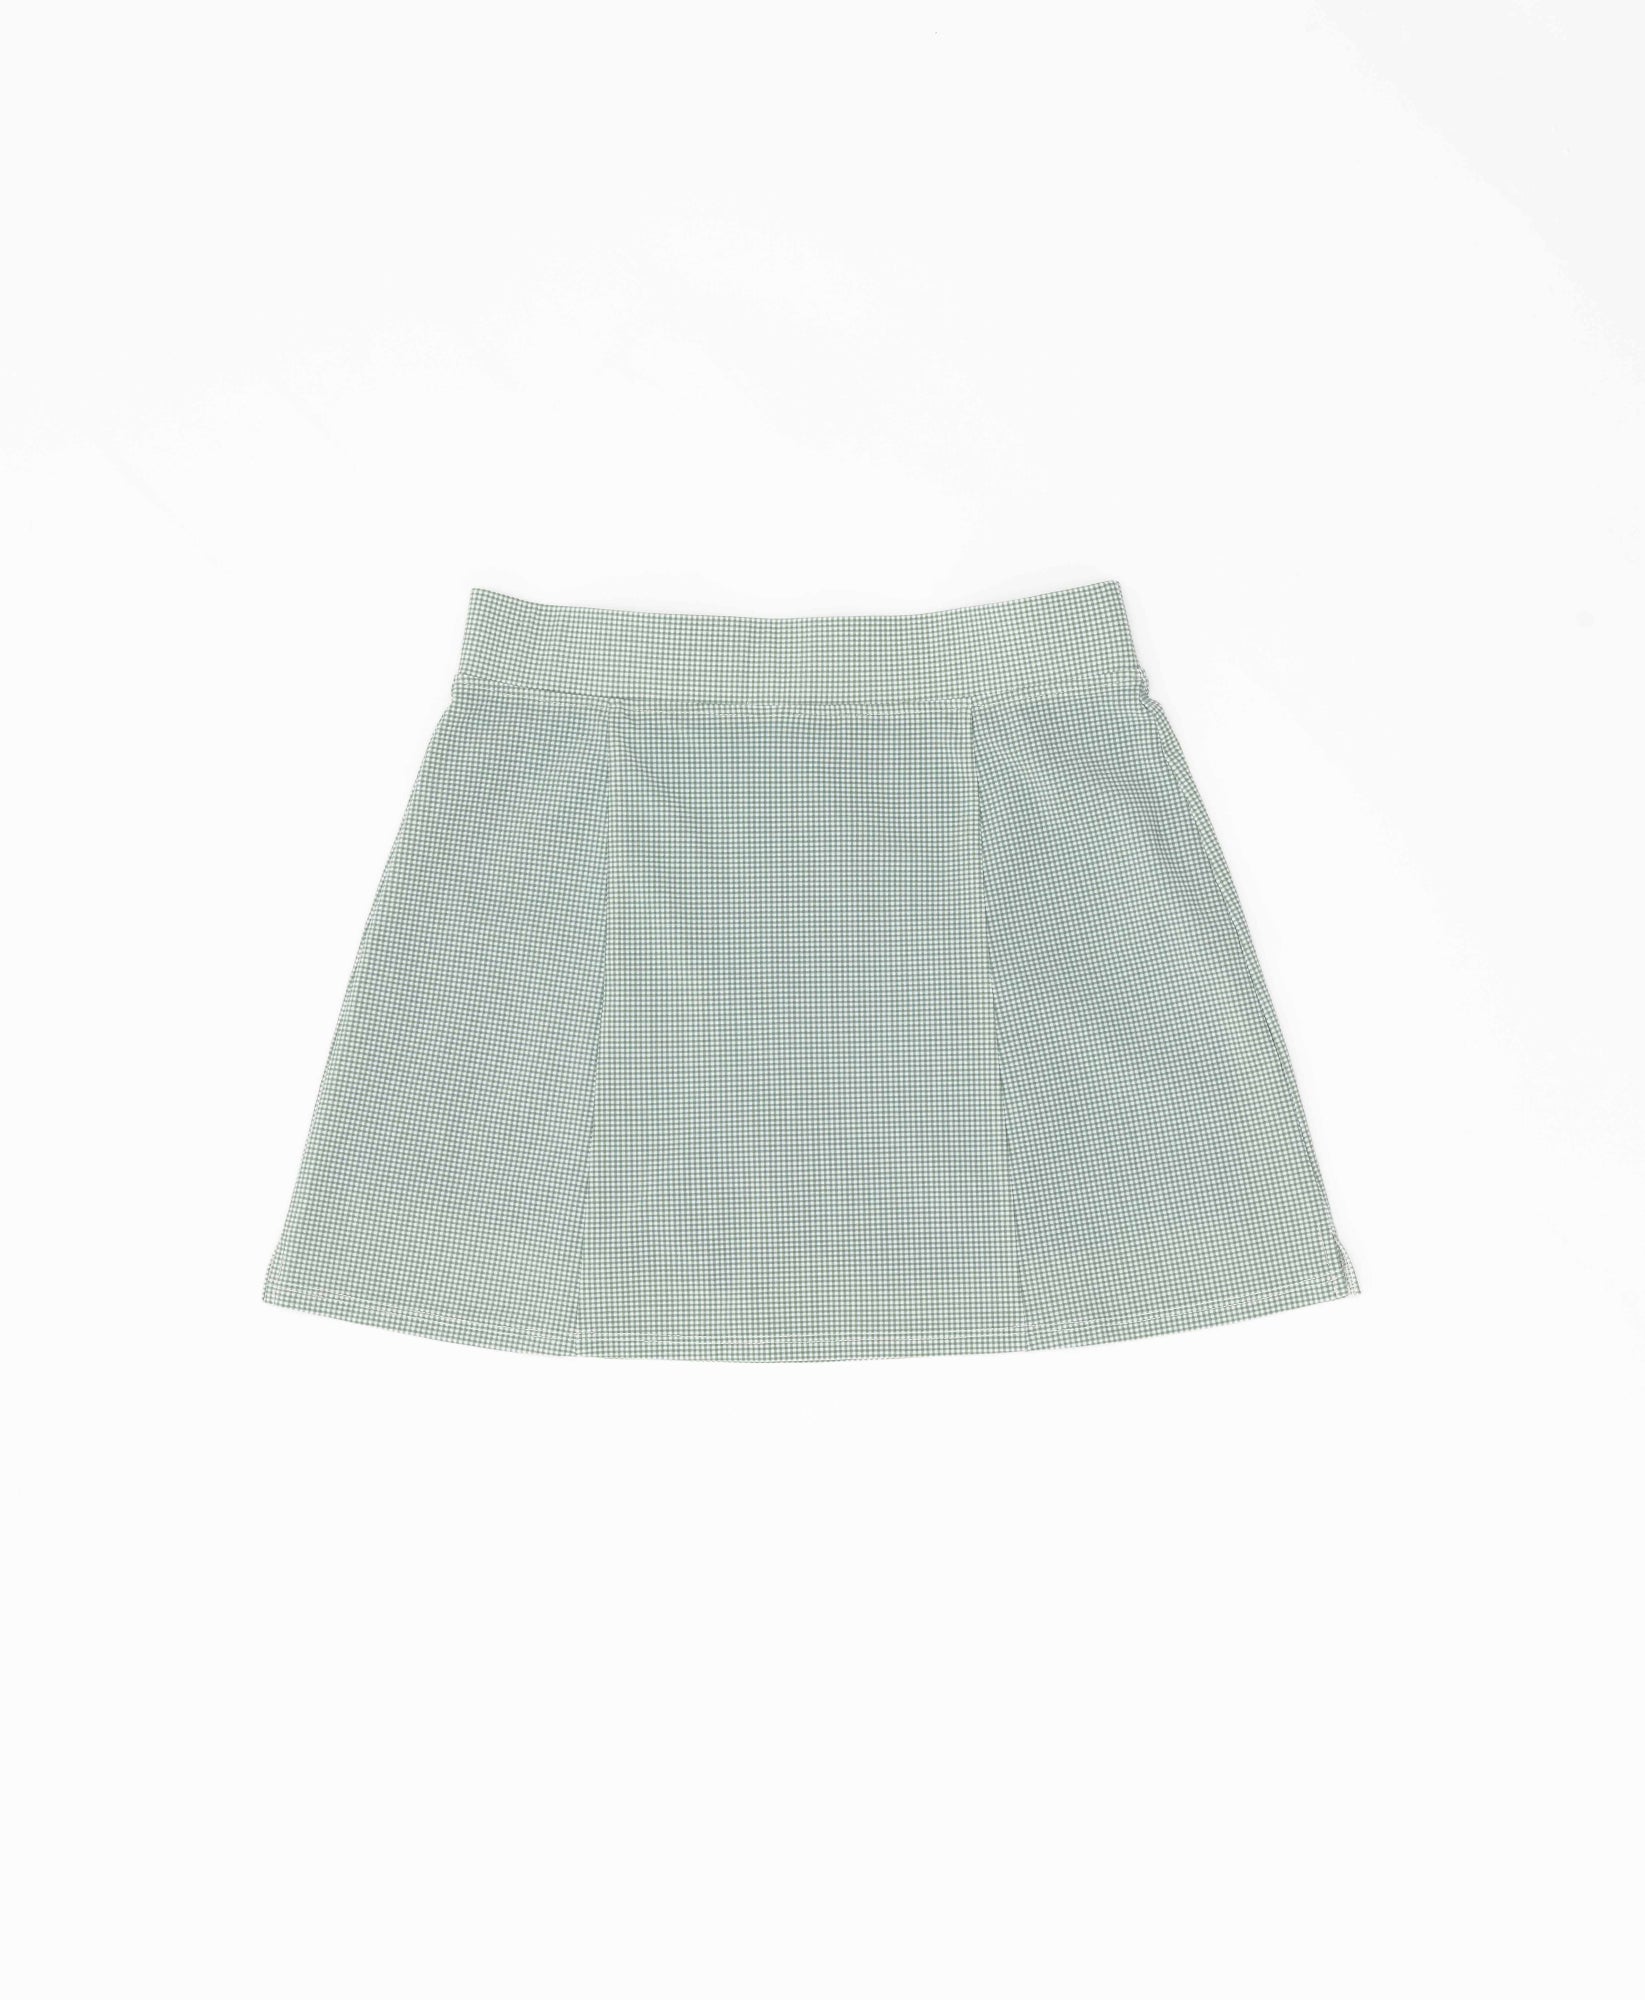 Shop All Women's Skorts from Wear One's At